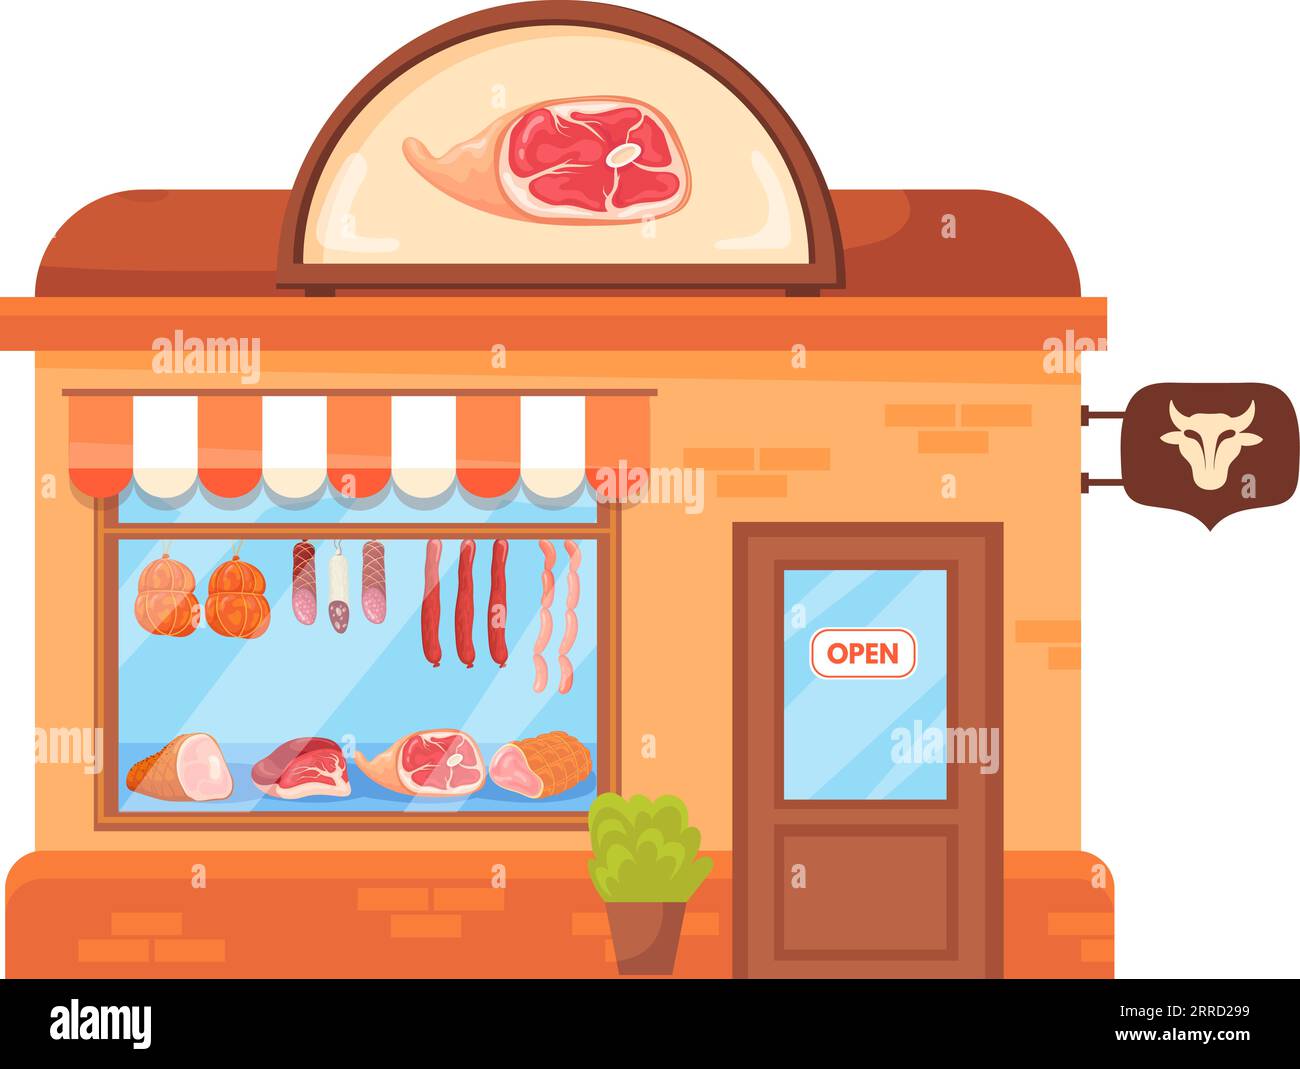 Butcher shop cartoon facade. Meat food store isolated on white background Stock Vector